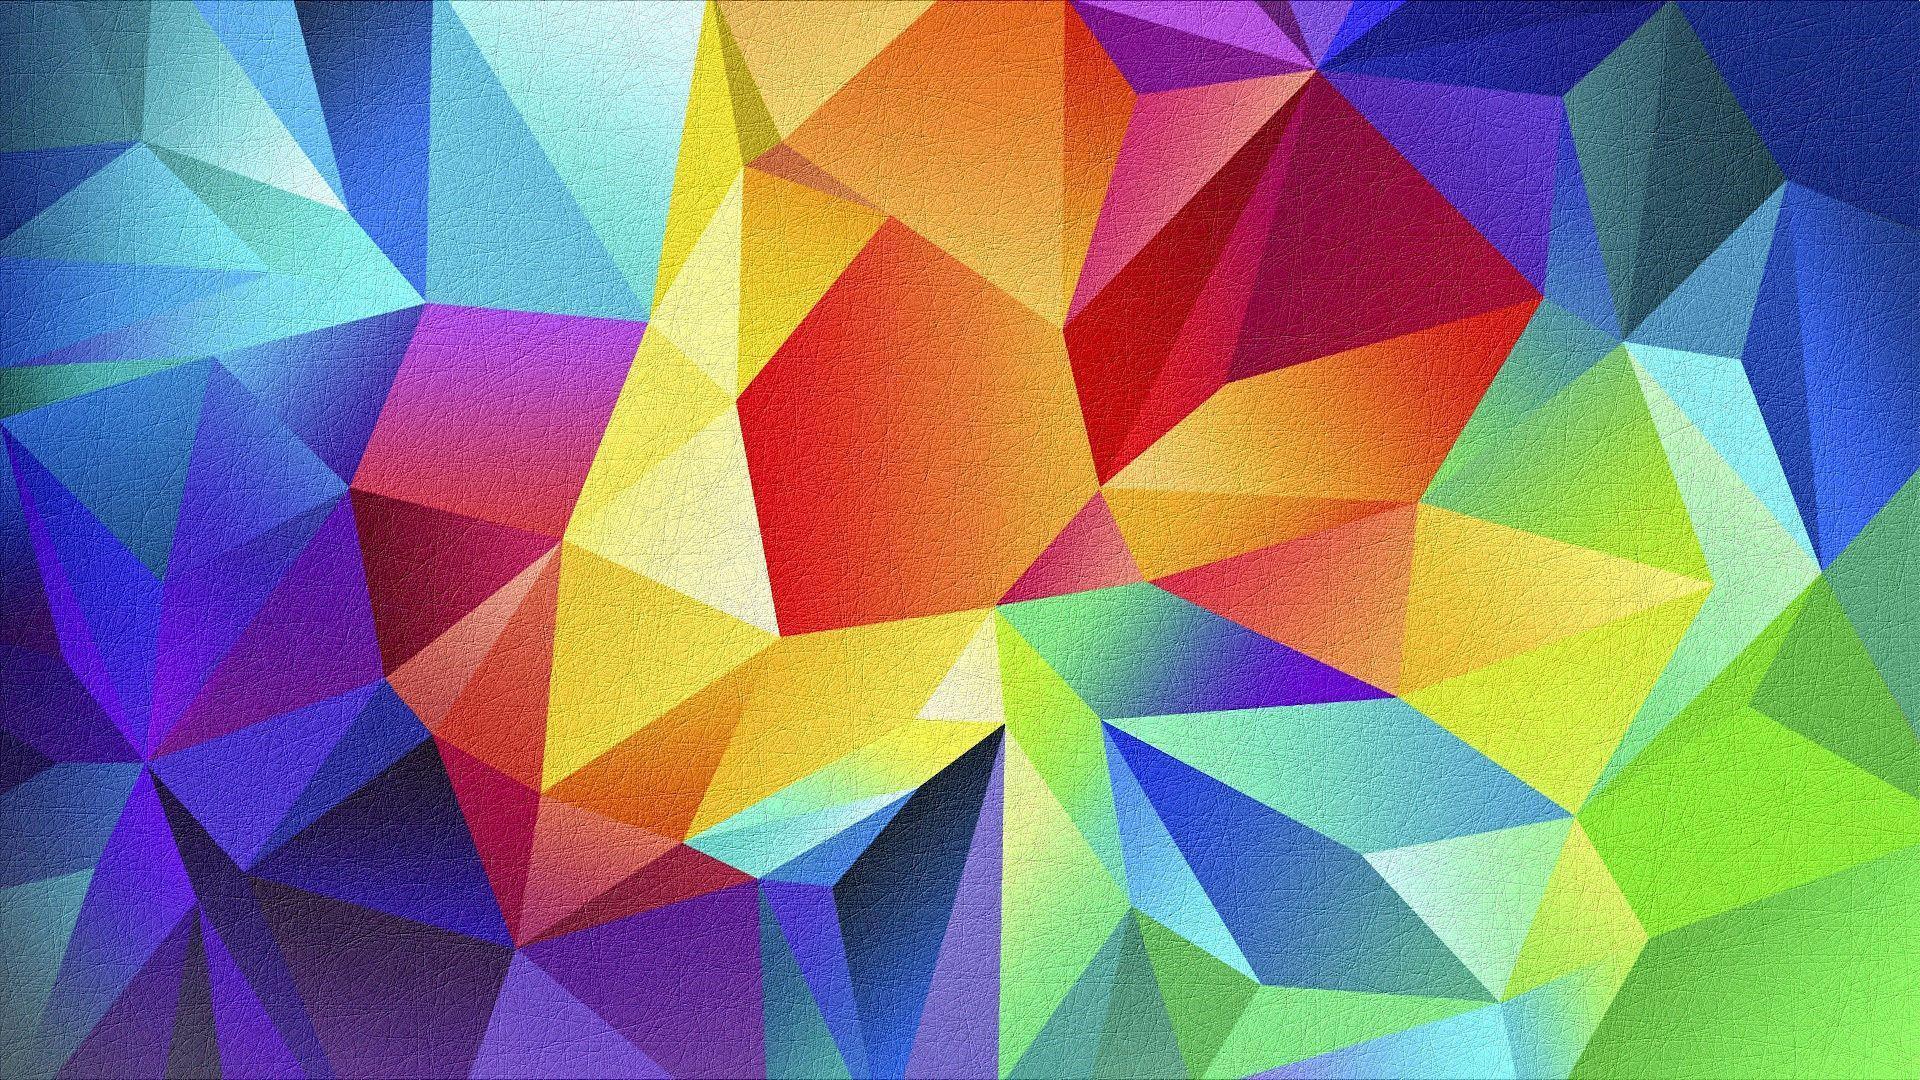 Colorful Geometric Shapes by HD Wallpaper Daily